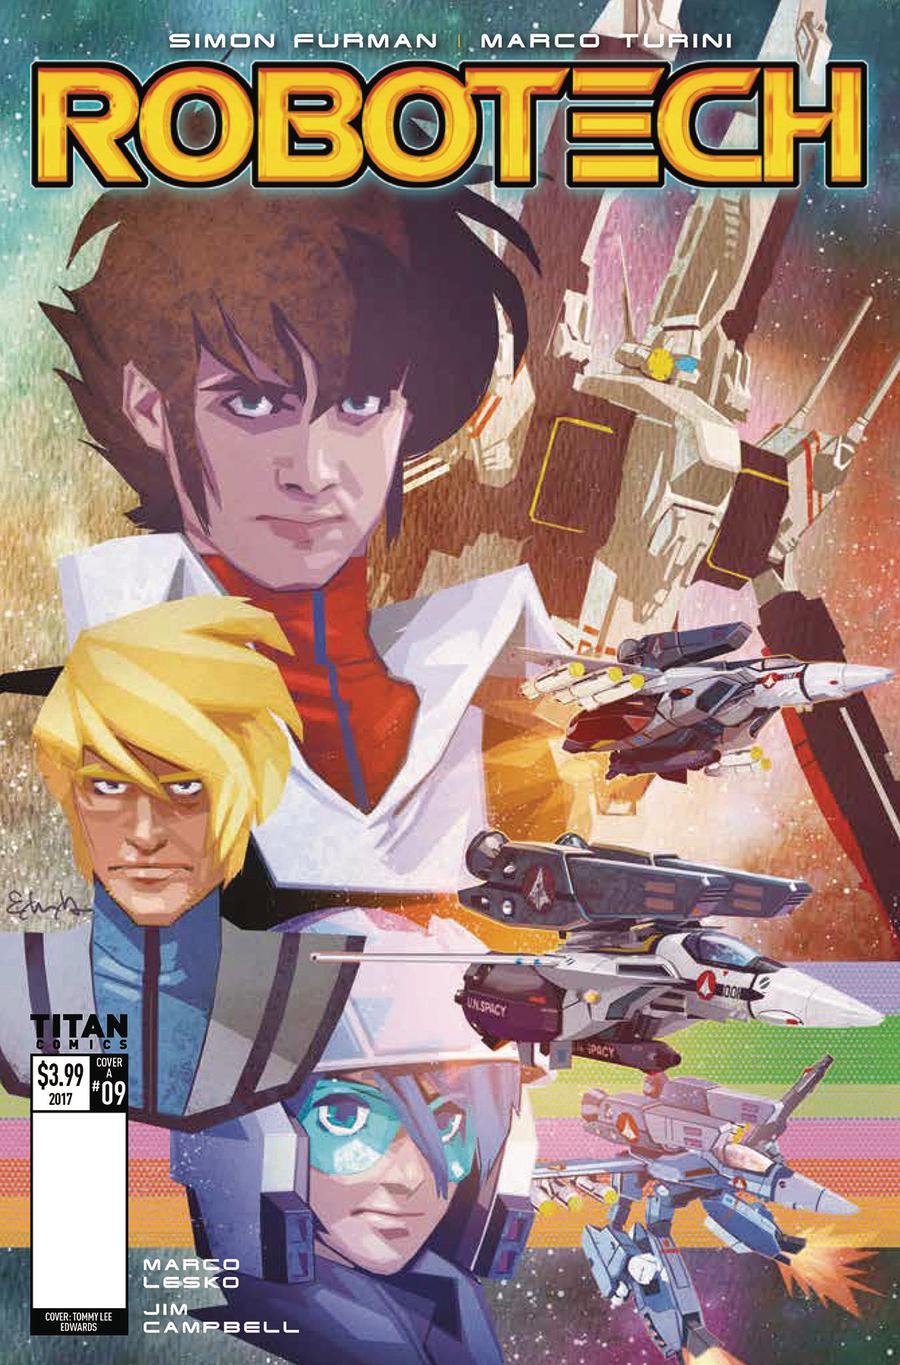 Robotech Vol 3 #9 Cover A Regular Tommy Lee Edwards Cover